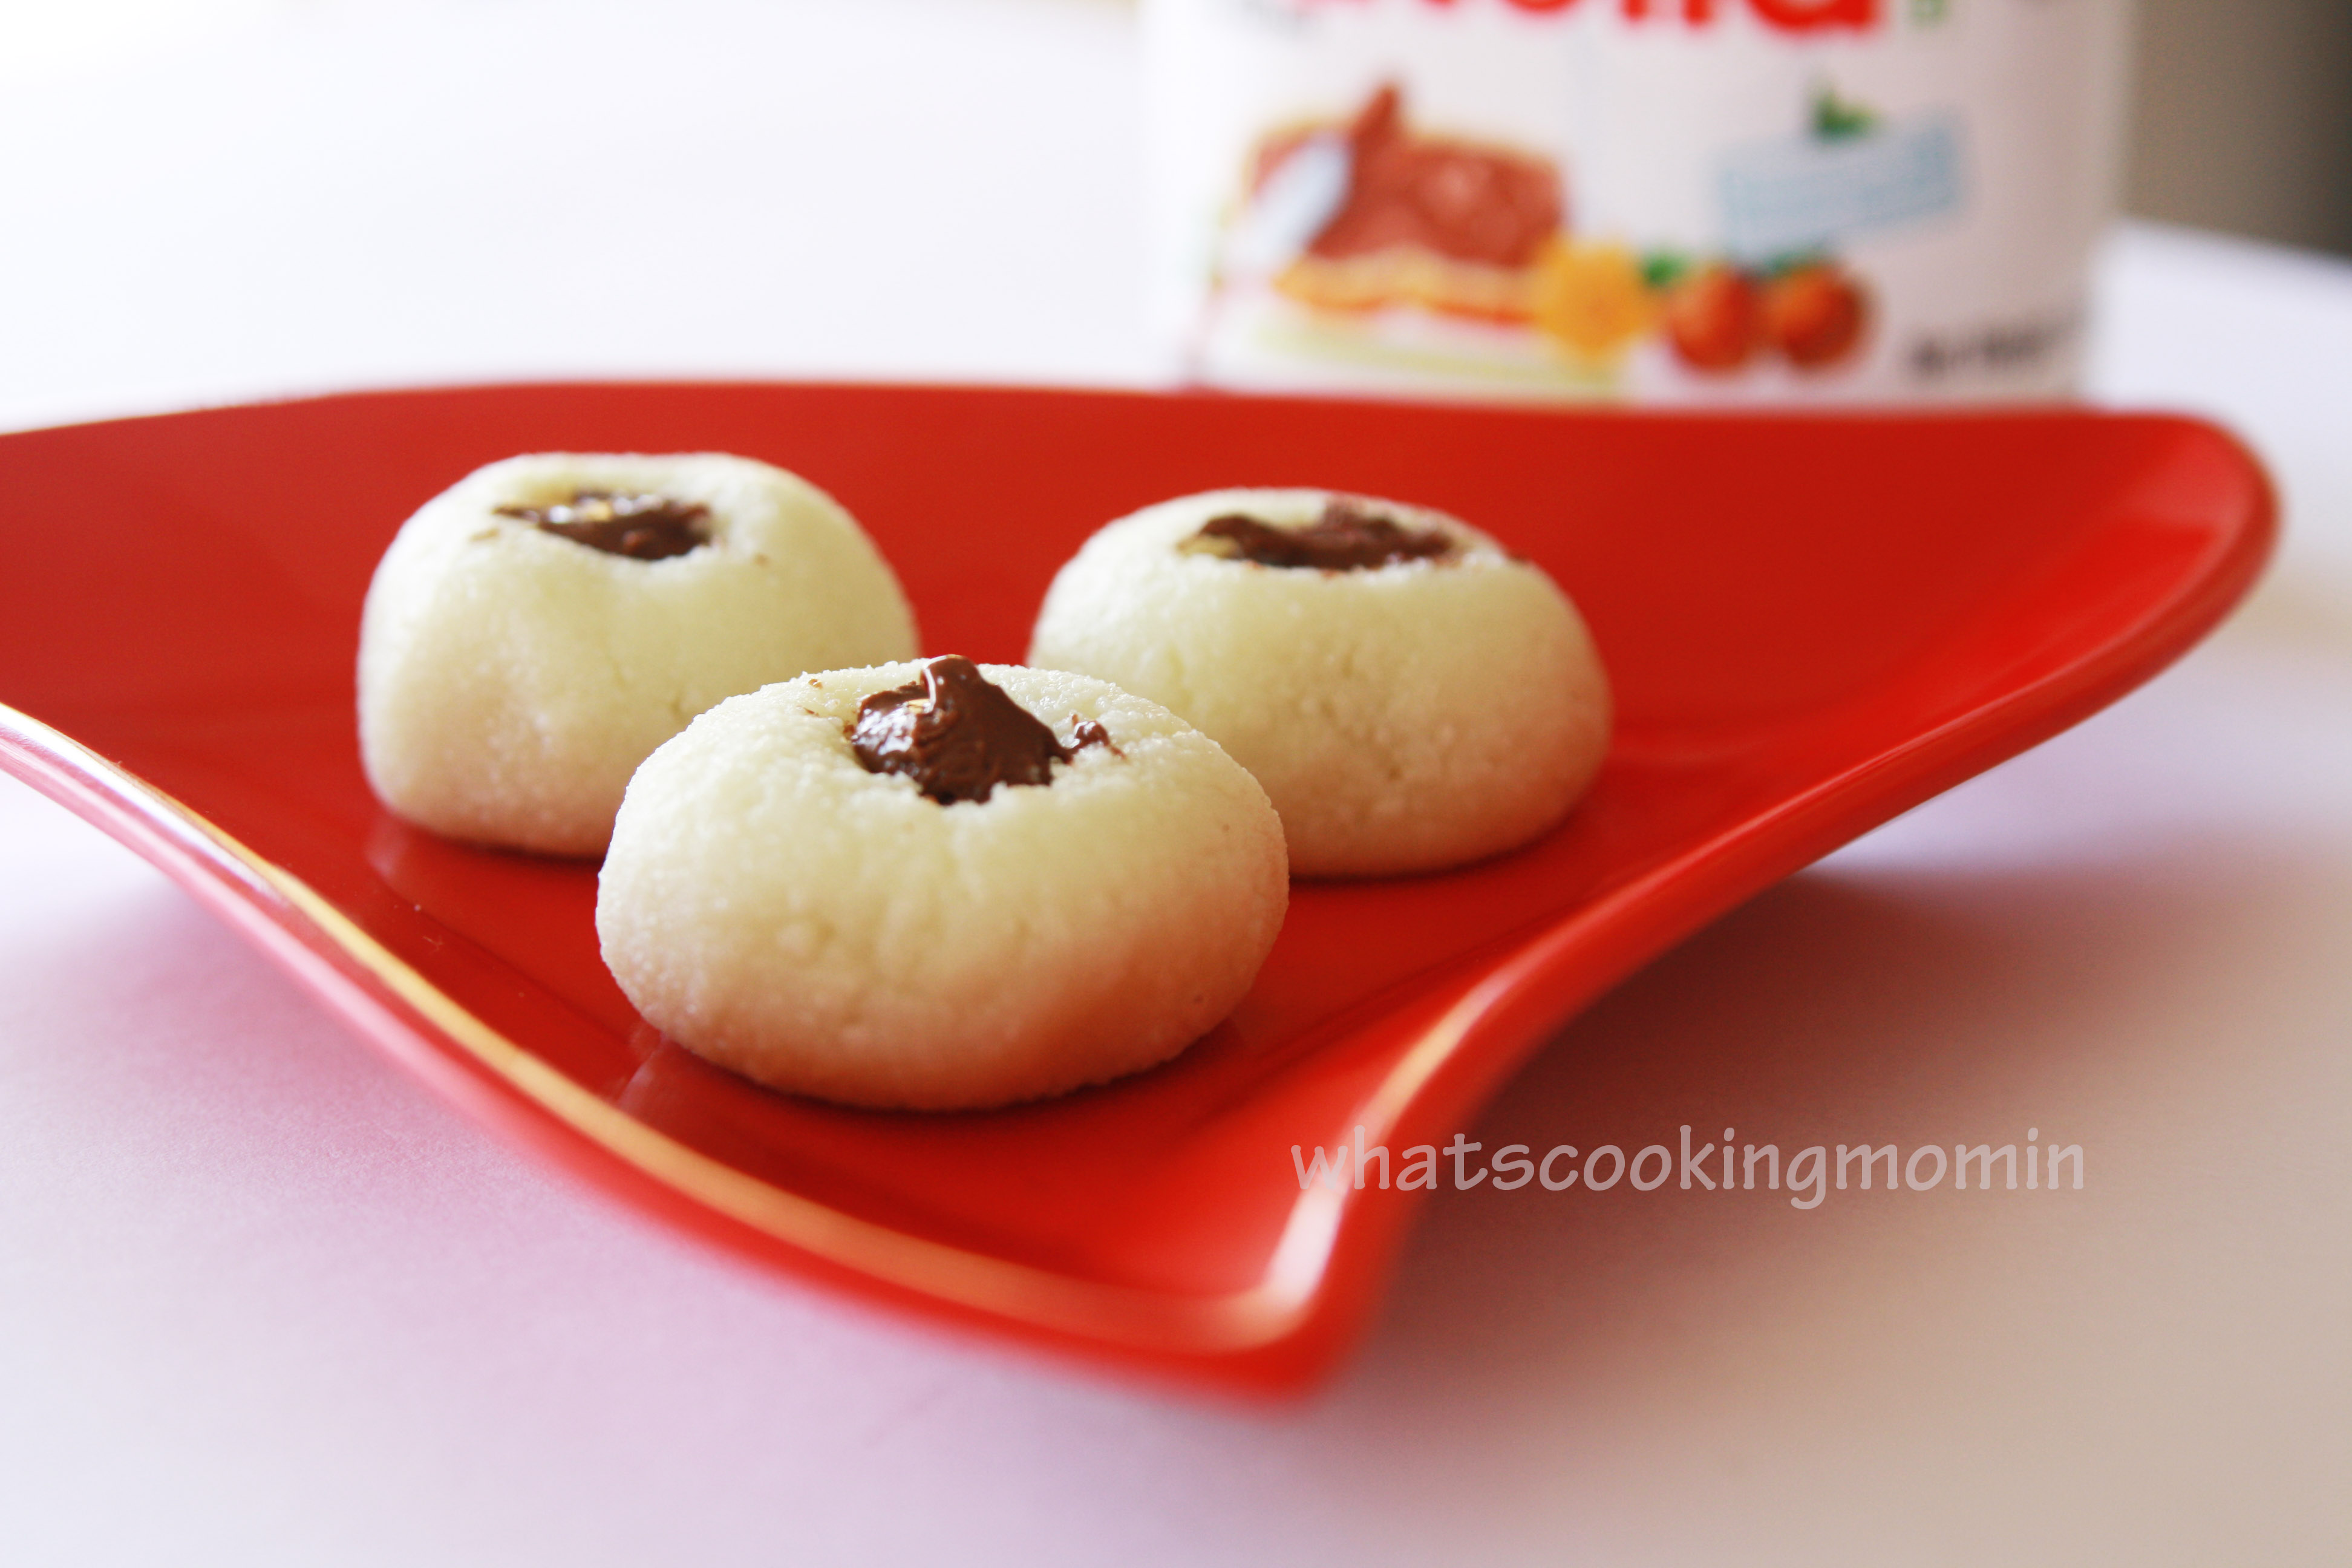 sandesh with nutella - Traditional Diwali recipes, Diwali sweets, festival sweets, Indian